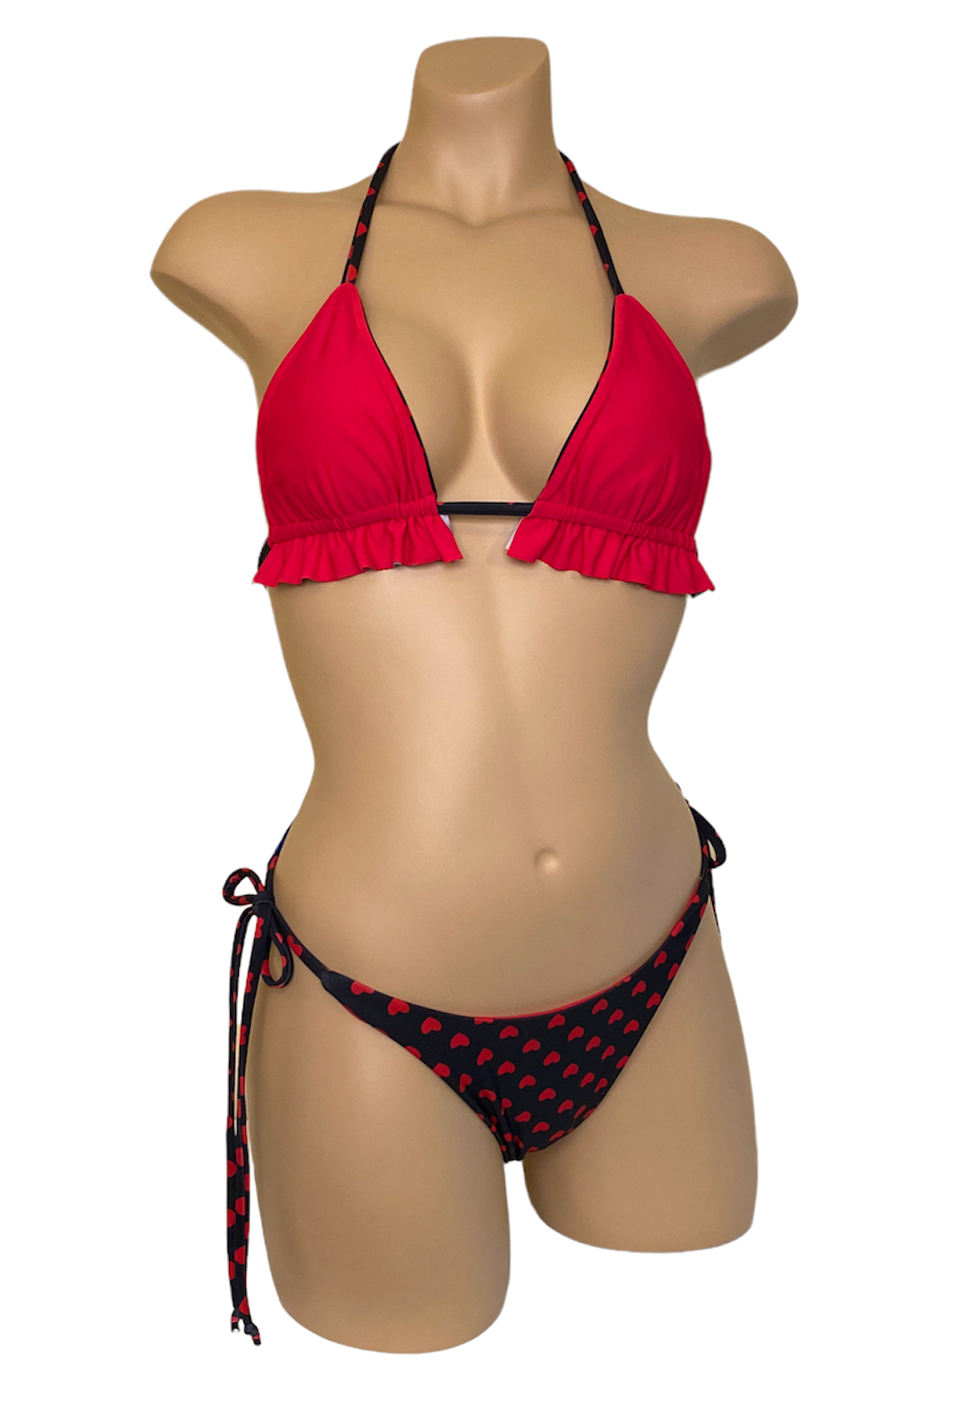 High hip tie side reversible bikni bottoms and ruffled triangle top in red hearts print, reverse side